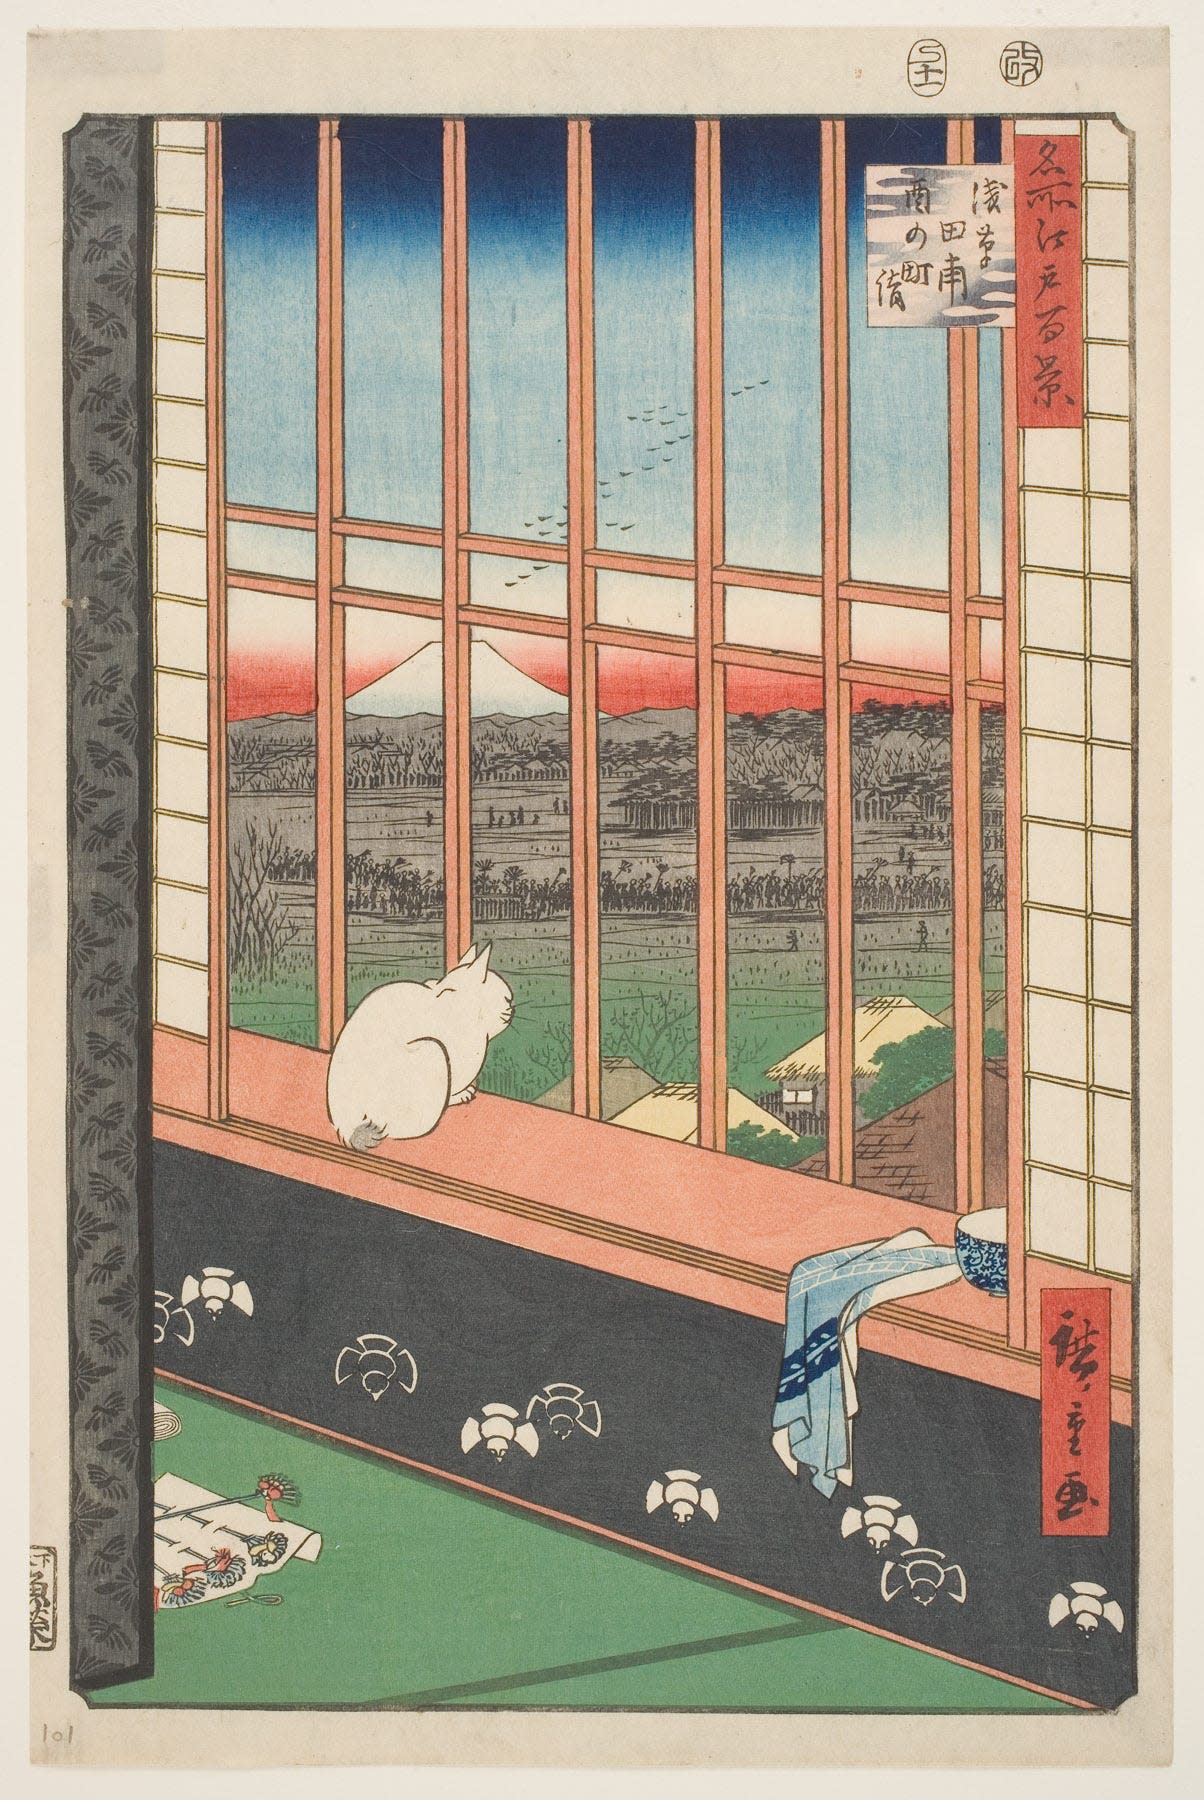 The pleasures of domestic life pop up time and again in "The Floating World," a show of Japanese woodblock prints at the Blanton Museum of Art. This is Utagawa Hiroshige's "Asakusa Rice Fields and Torinomachi Festival," from the series "One Hundred Famous Views of Edo," 1857